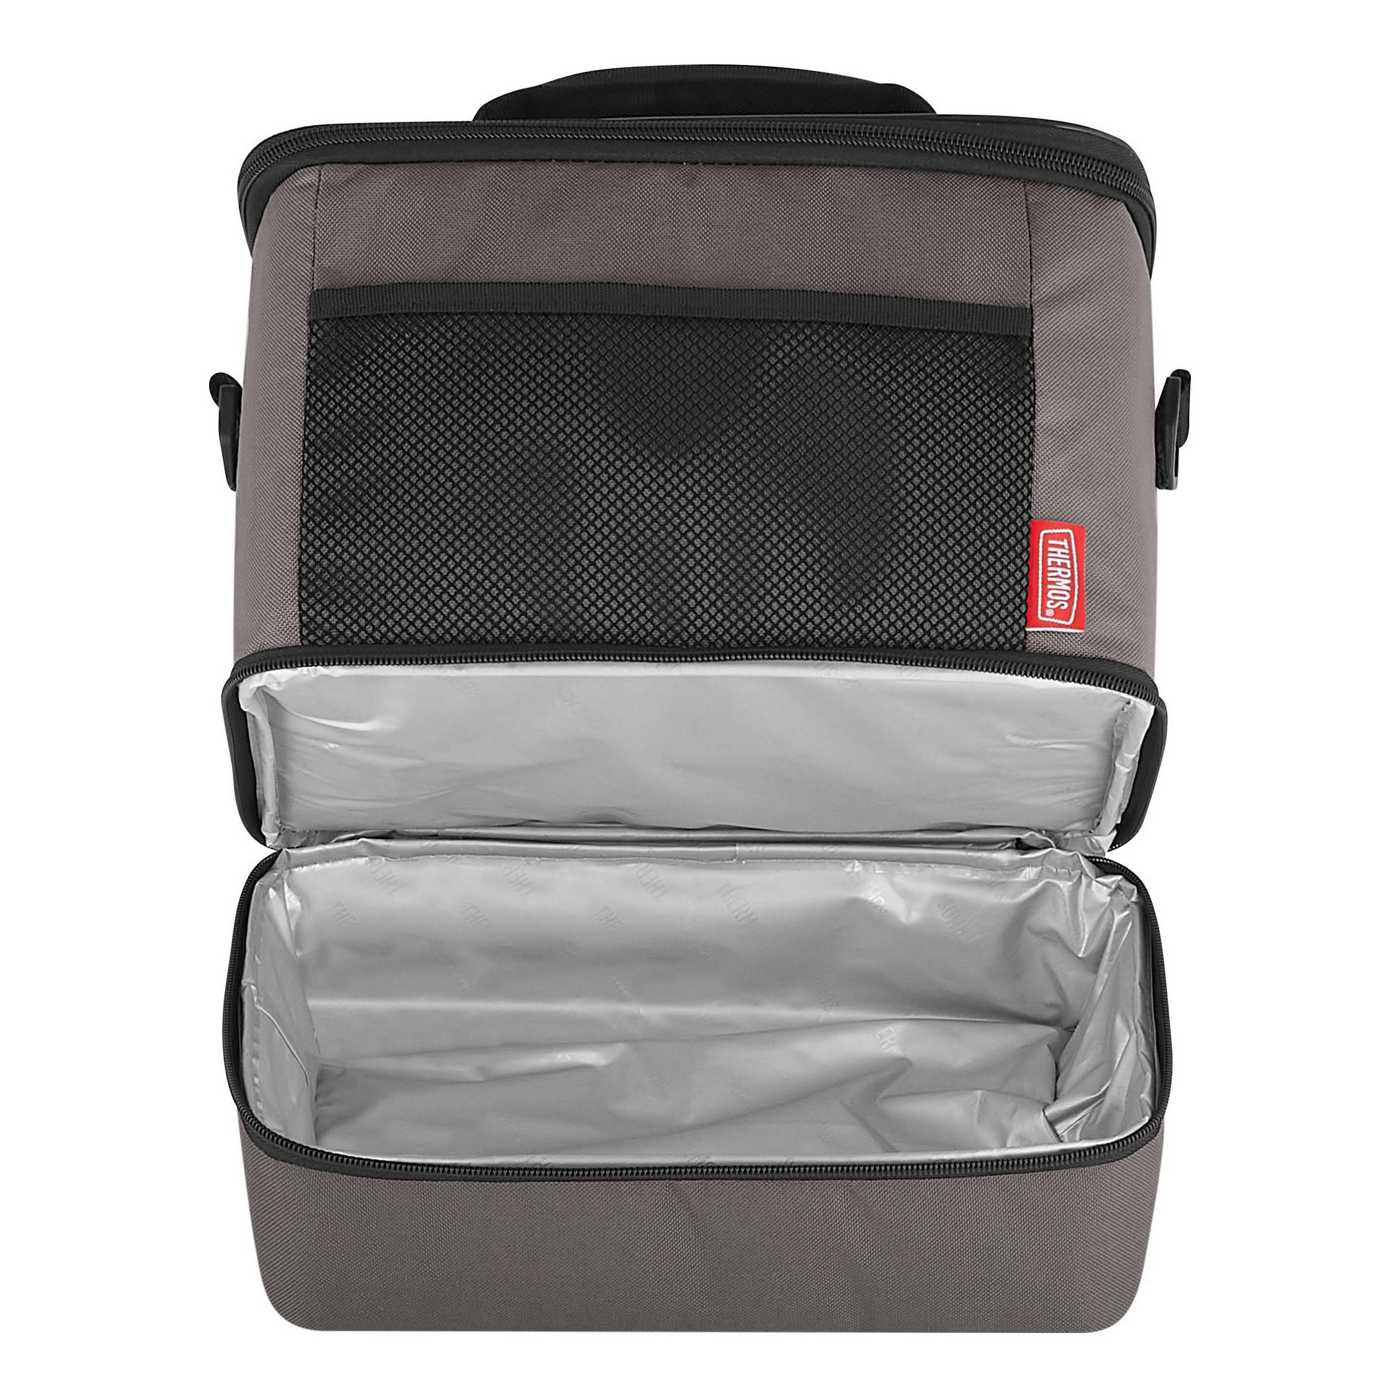 Thermos Lunch Lugger - Gray; image 3 of 3